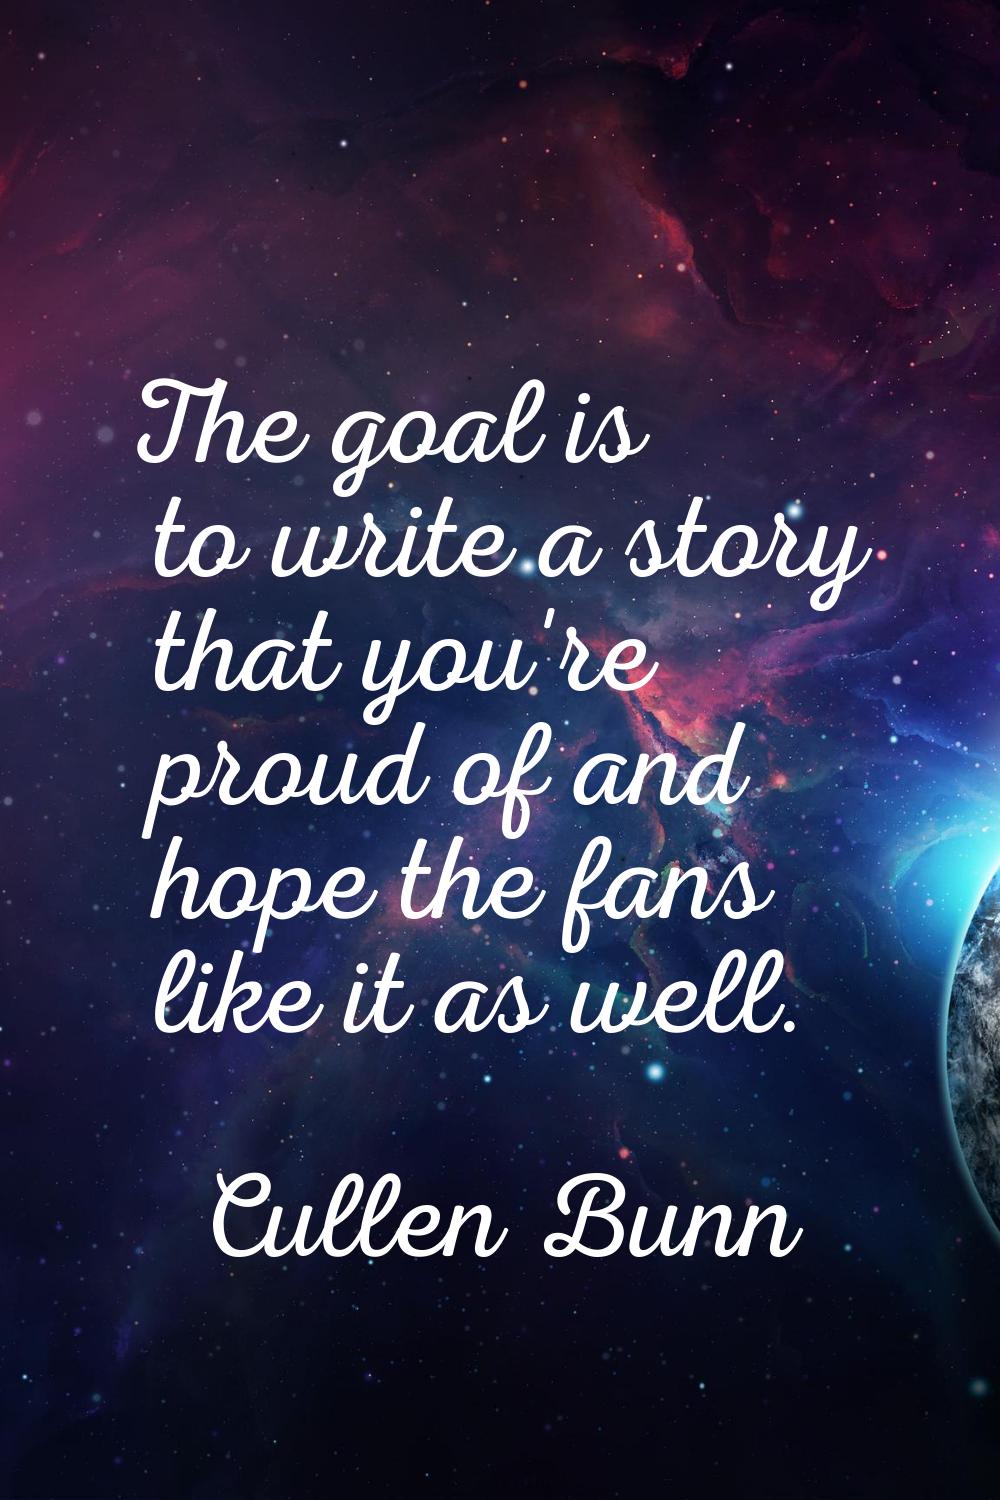 The goal is to write a story that you're proud of and hope the fans like it as well.